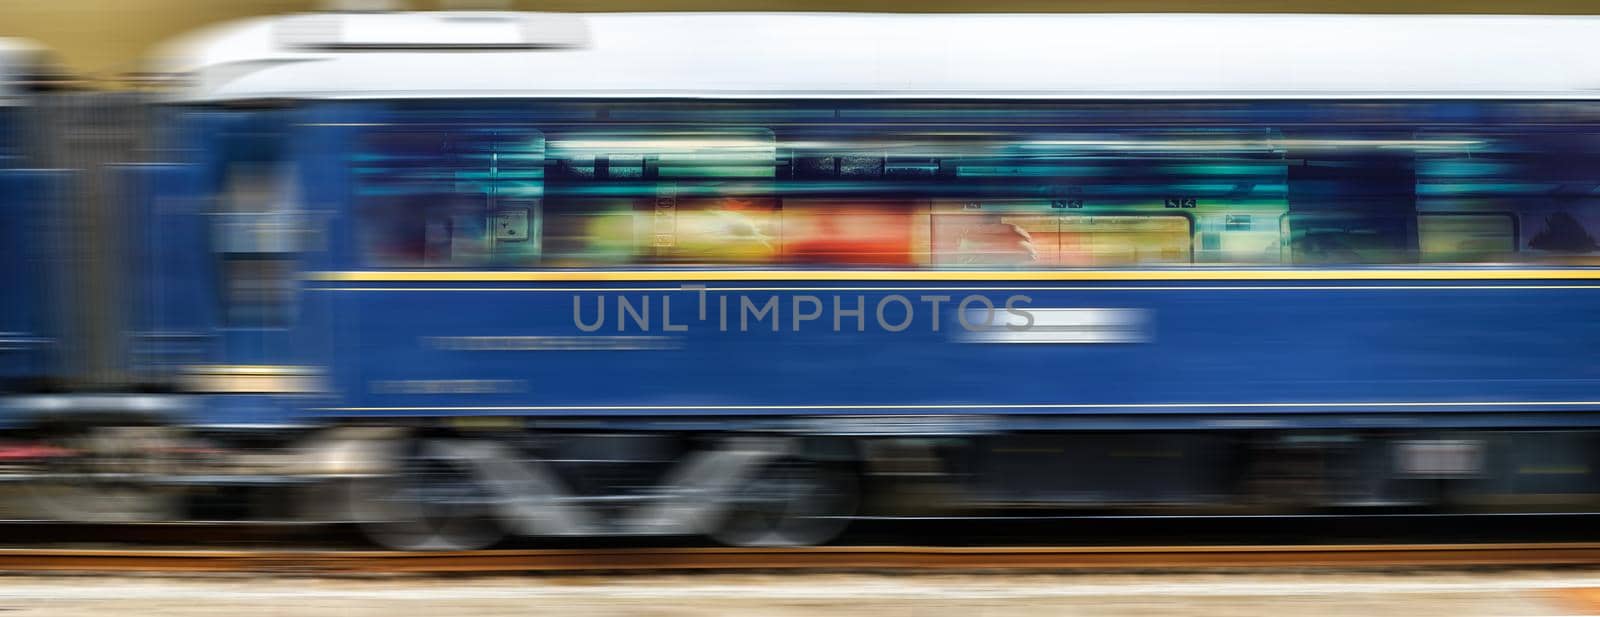 Motion blur of high speed train by Roberto